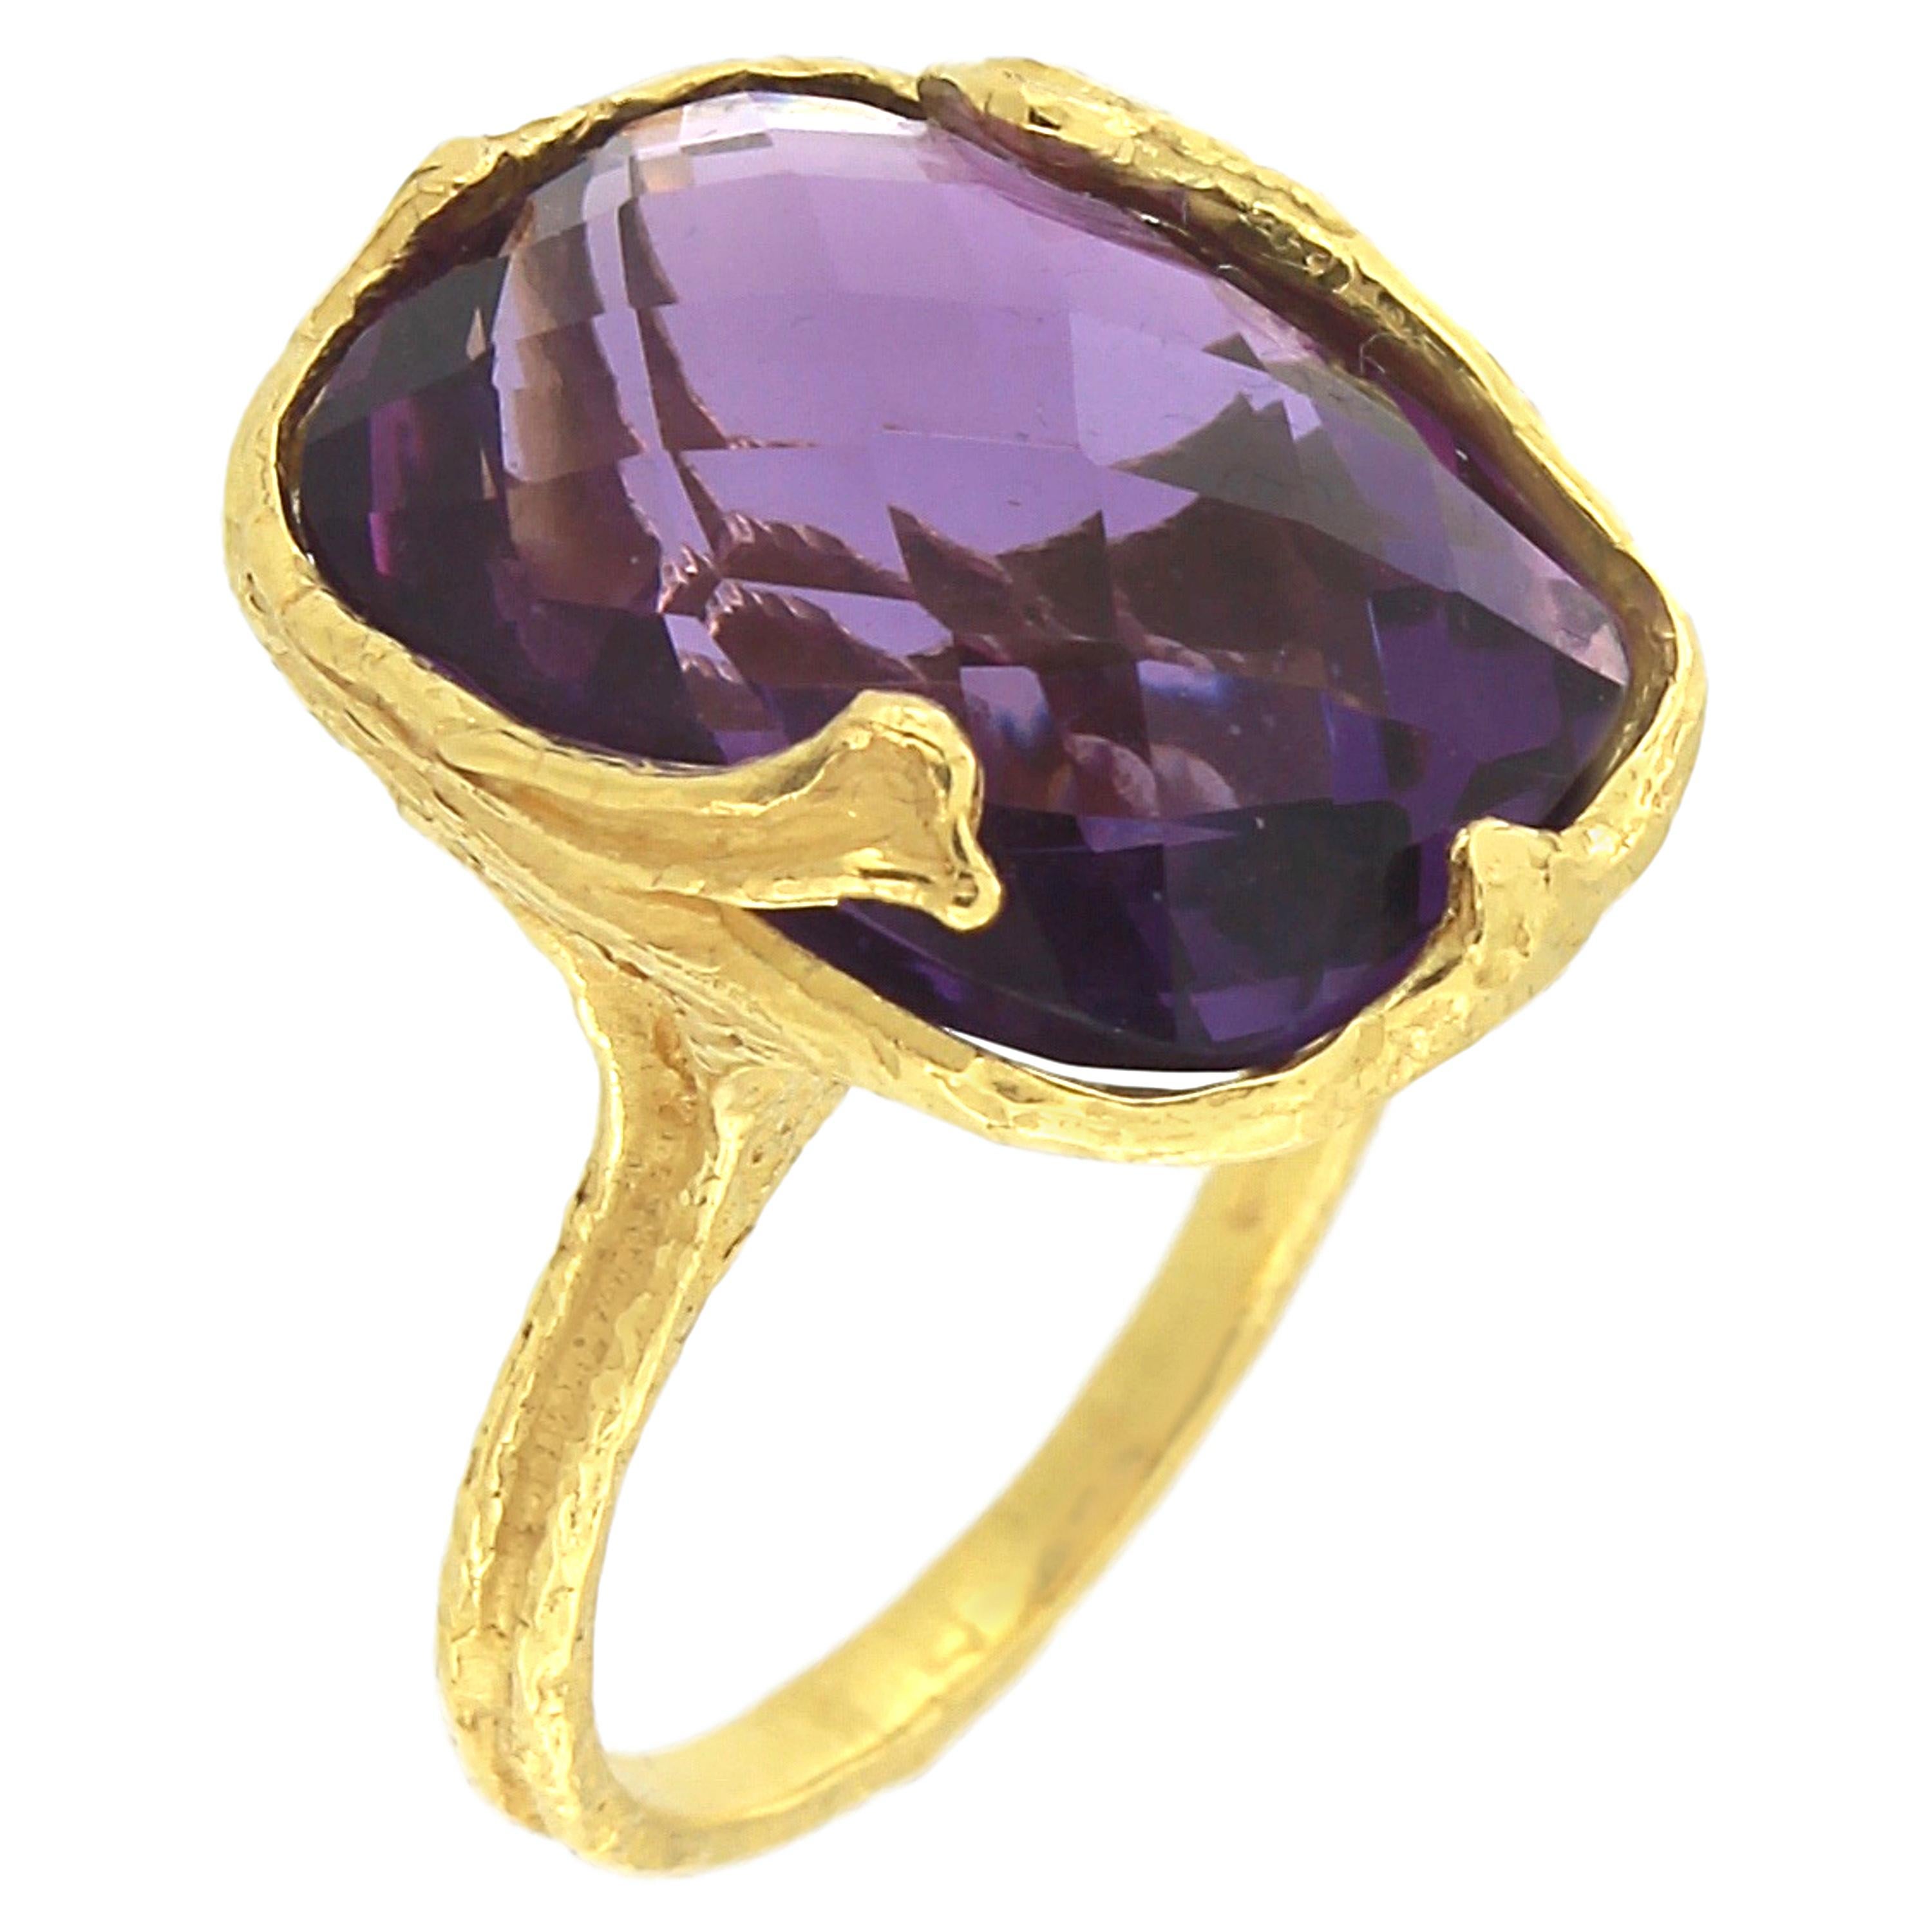 Exquisite Purple Amethyst Gold Ring, from Sacchi's 